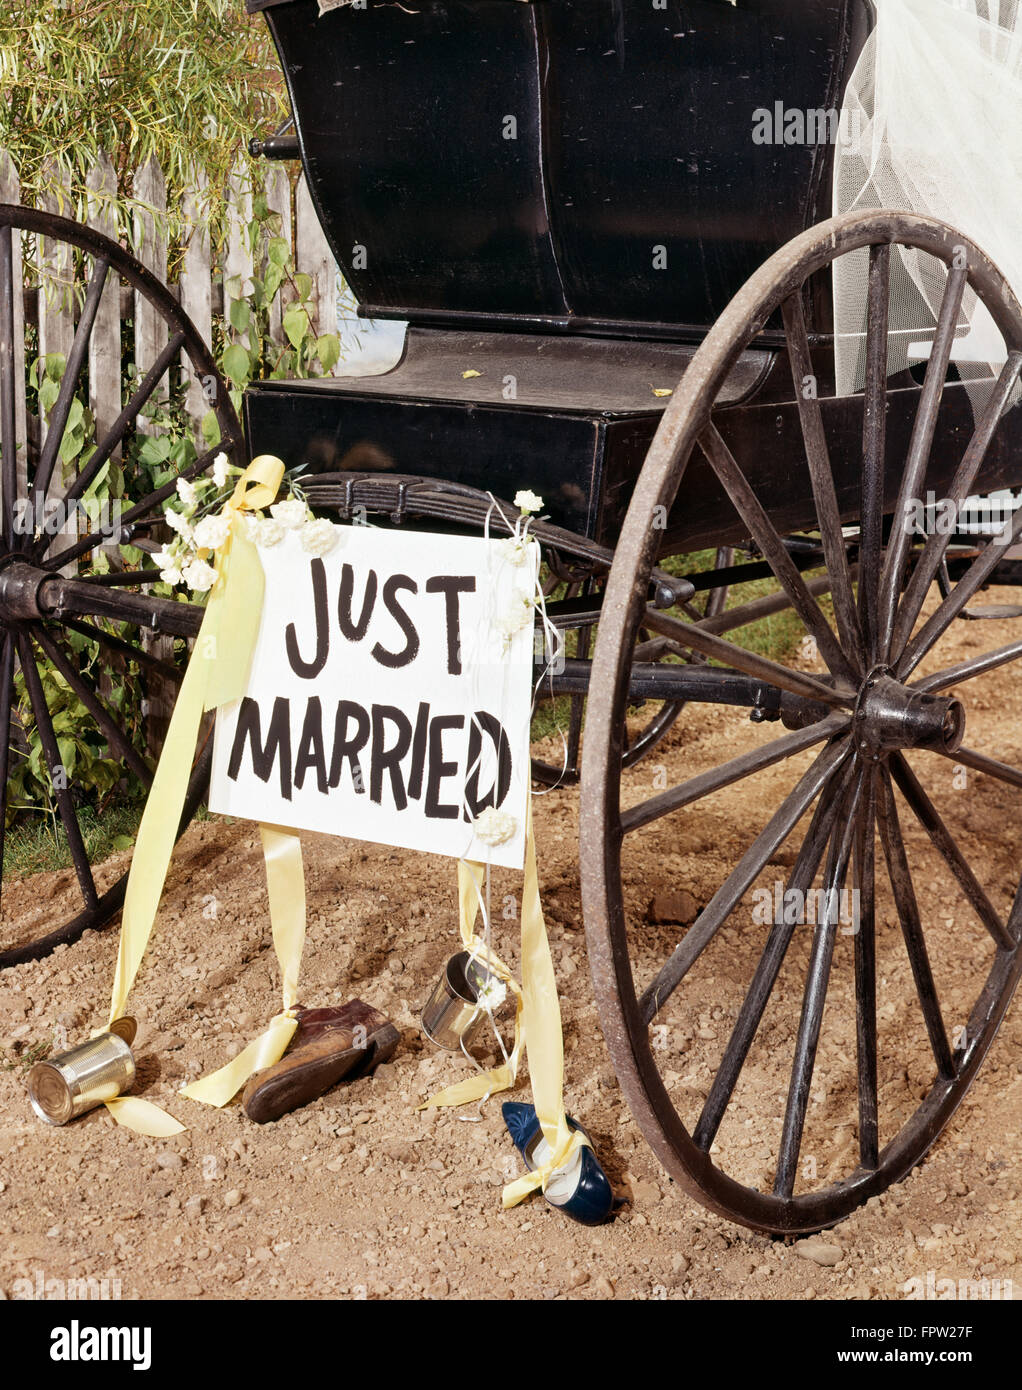 1970s HORSE DRAWN BUGGY WITH JUST MARRIED SIGN SHOES AND TIN CANS TIED ON WITH YELLOW RIBBON BRIDAL VEIL INSIDE BUGGY Stock Photo